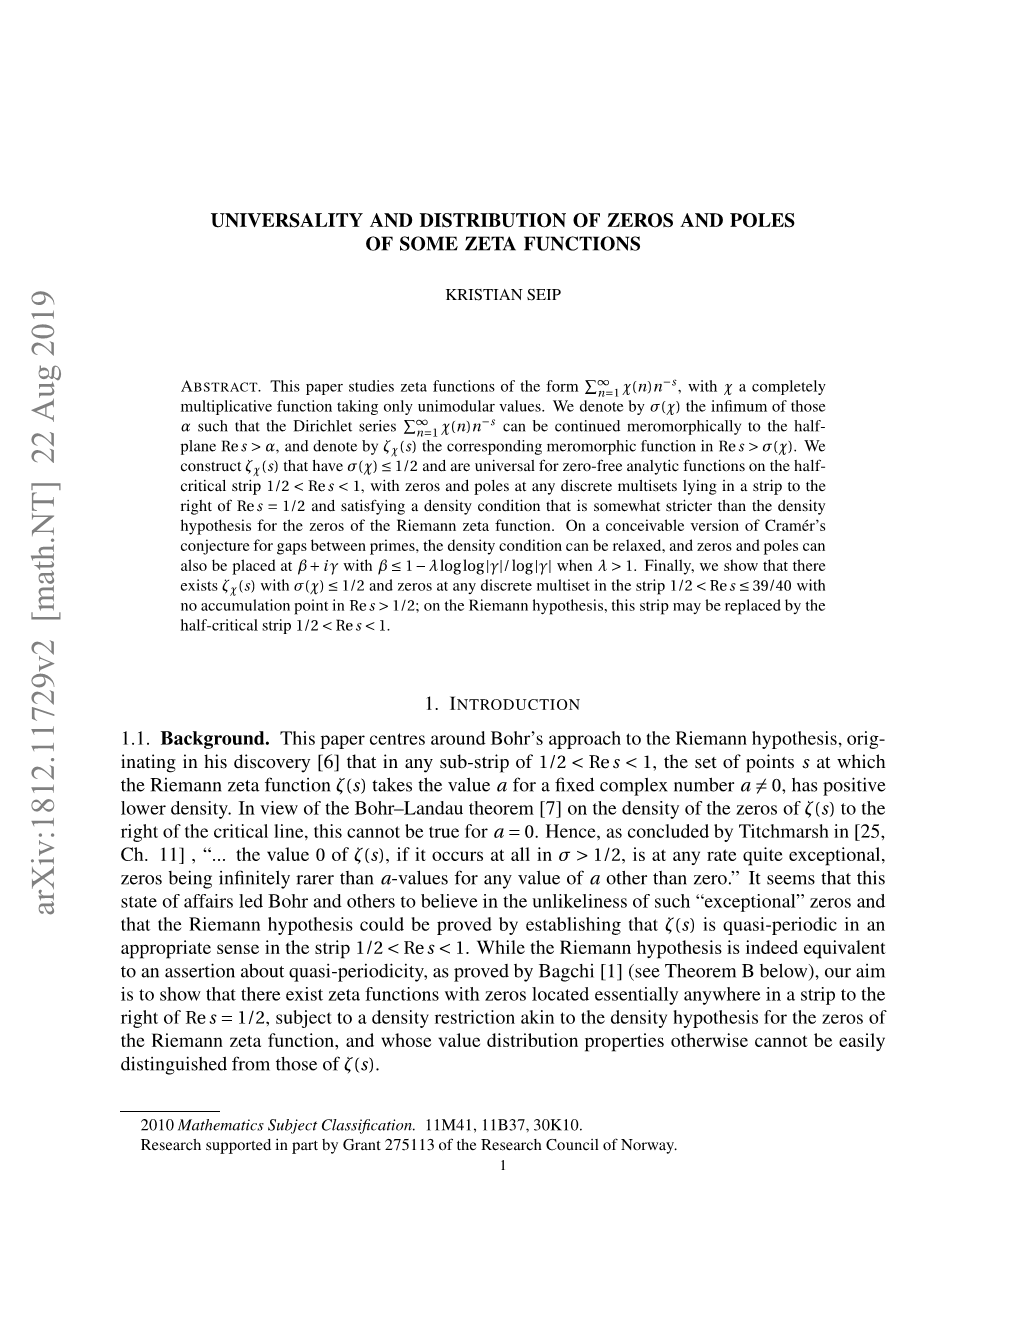 Arxiv:1812.11729V2 [Math.NT] 22 Aug 2019 Oe Est.I Iwo H Orlna Hoe 7 Nted the on [7] Theorem Bohr–Landau the of View in Density